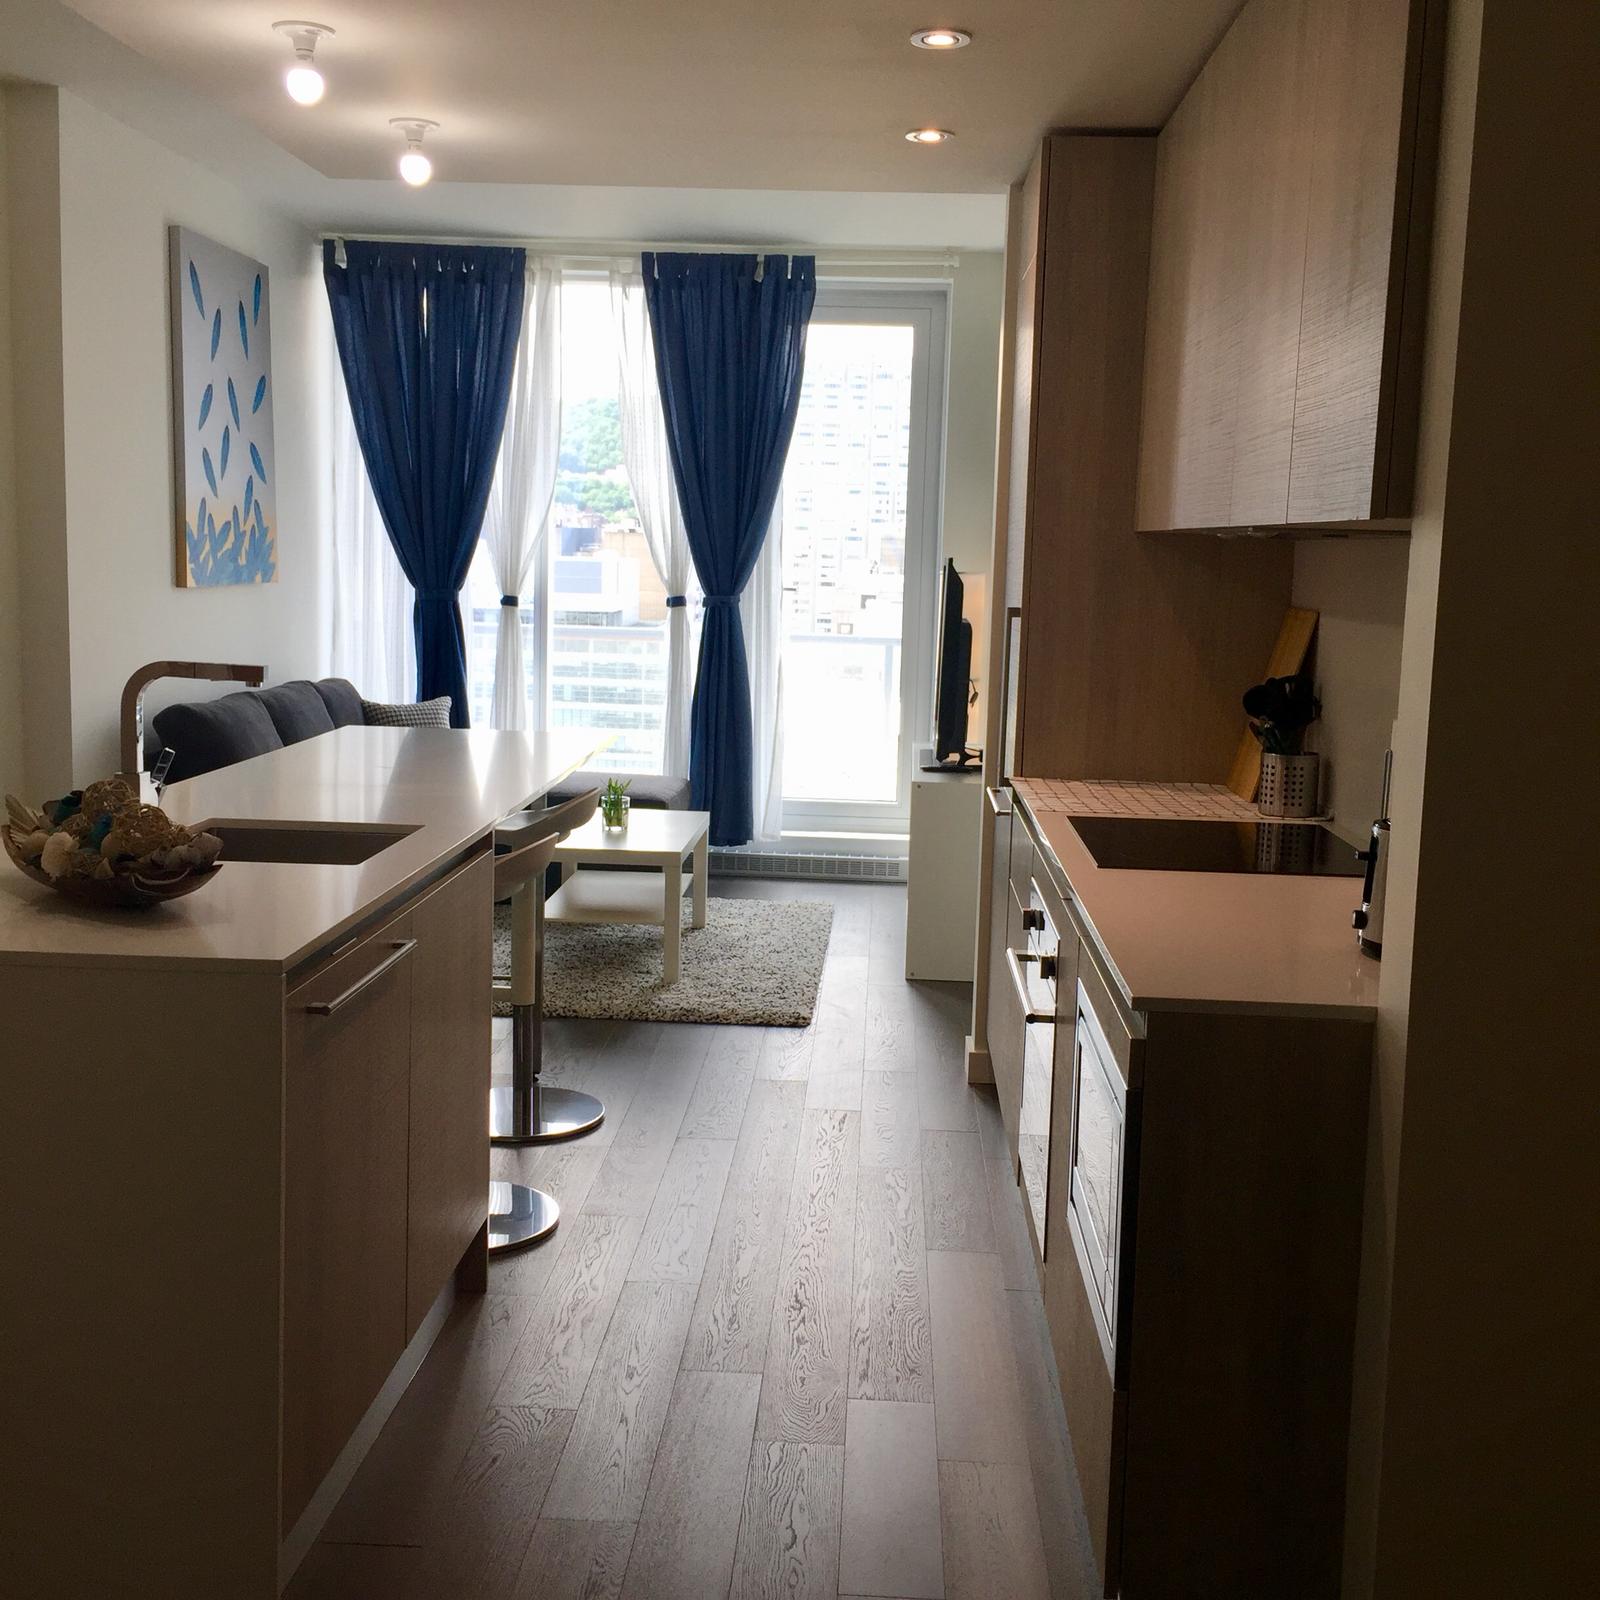 Humaniti Rental Condos - Property for rent in Montreal QC